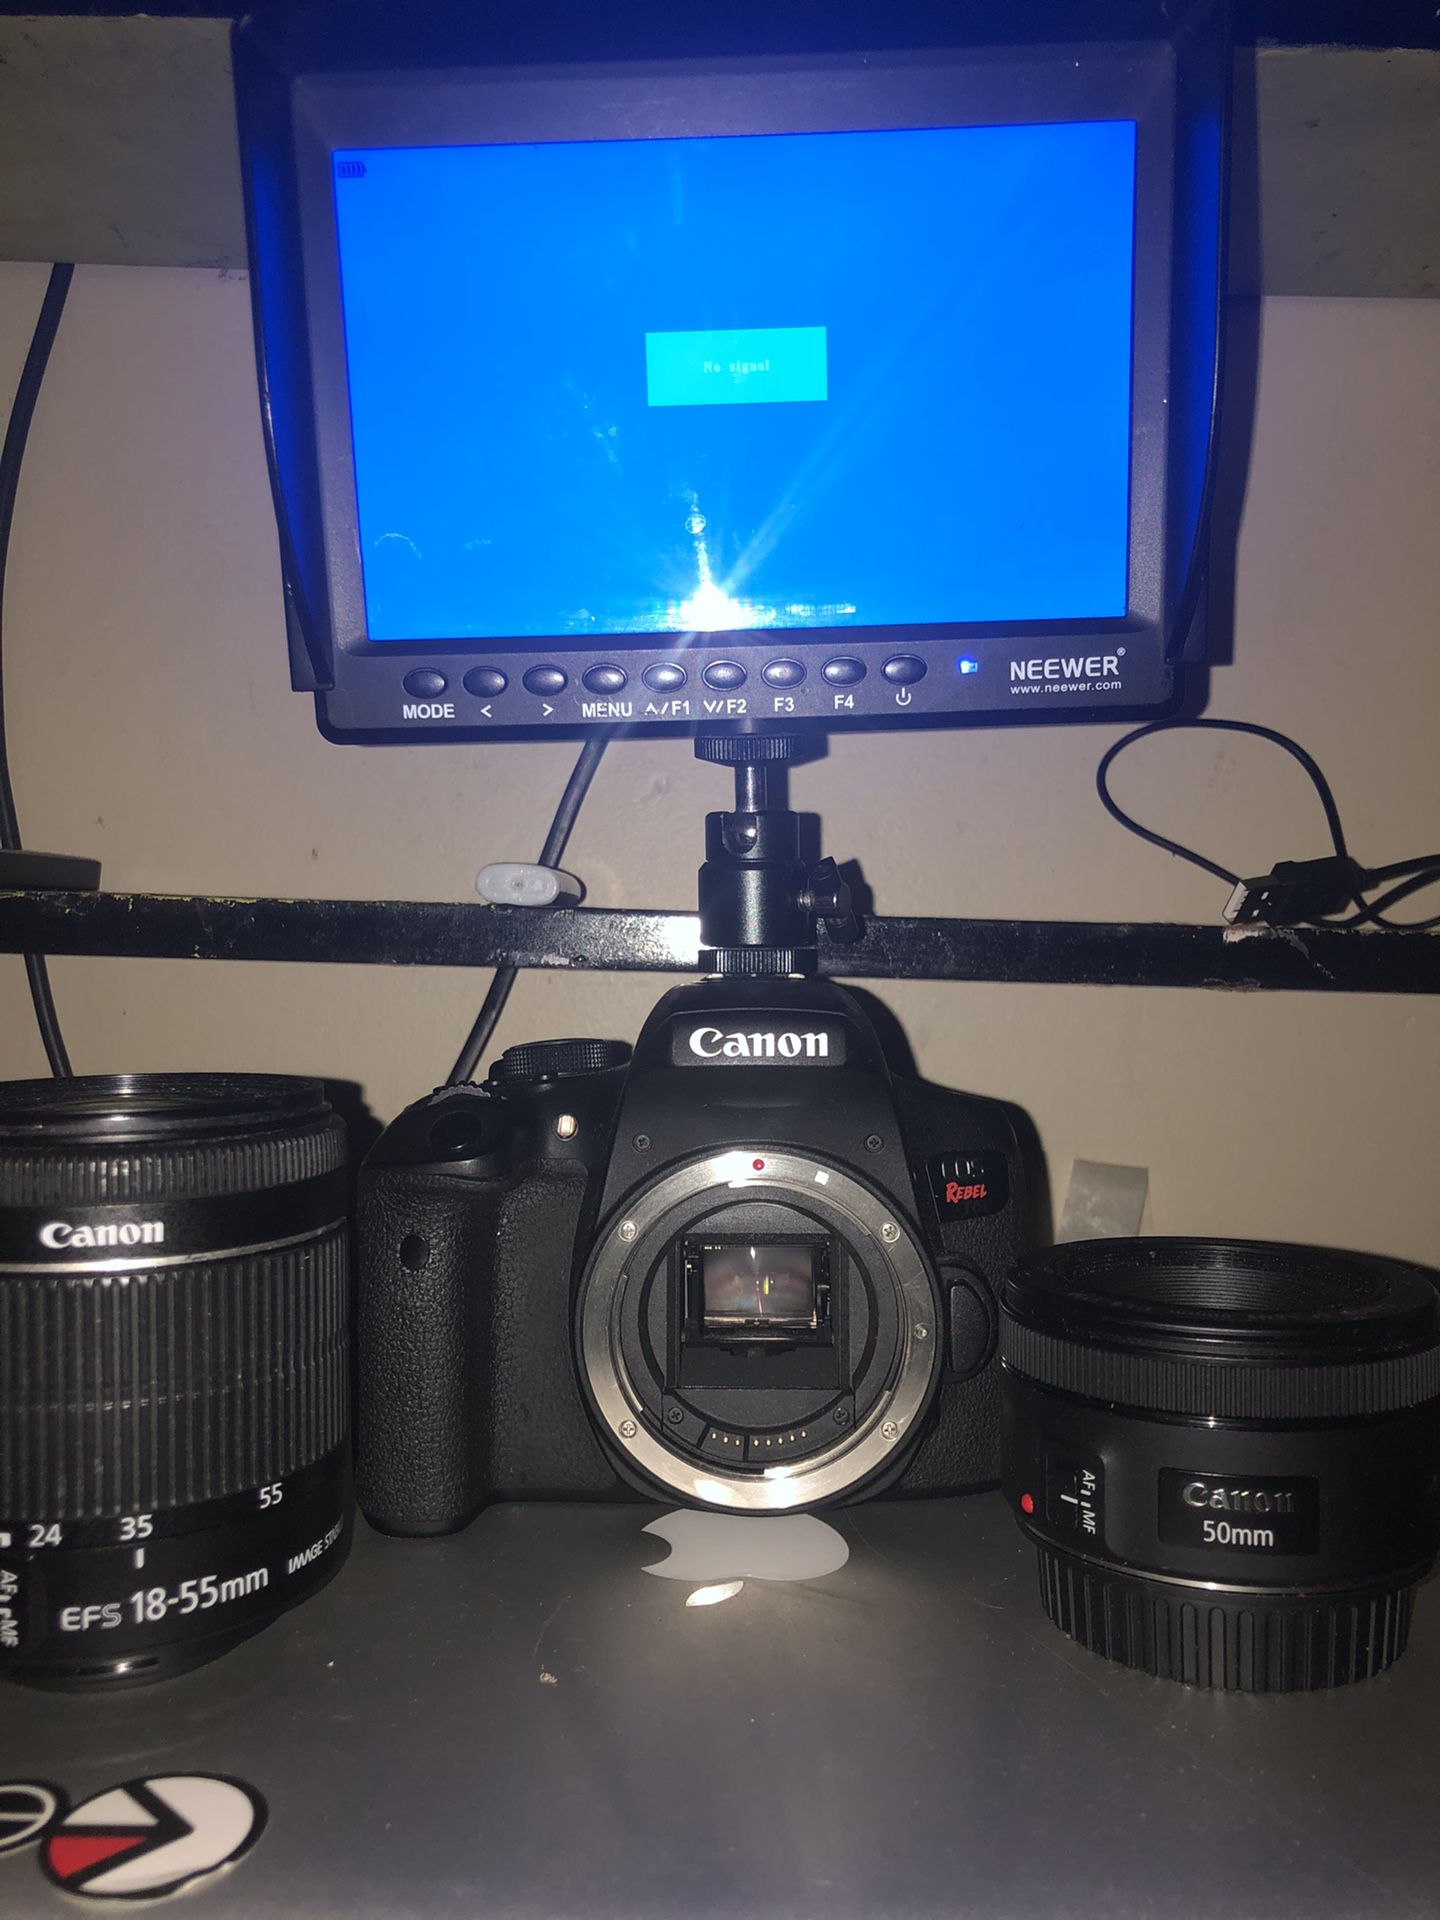 Canon Rebel T6i , canon lens 18-55mm & 50mm , Neewer Monitor, Neewer Stabilizer